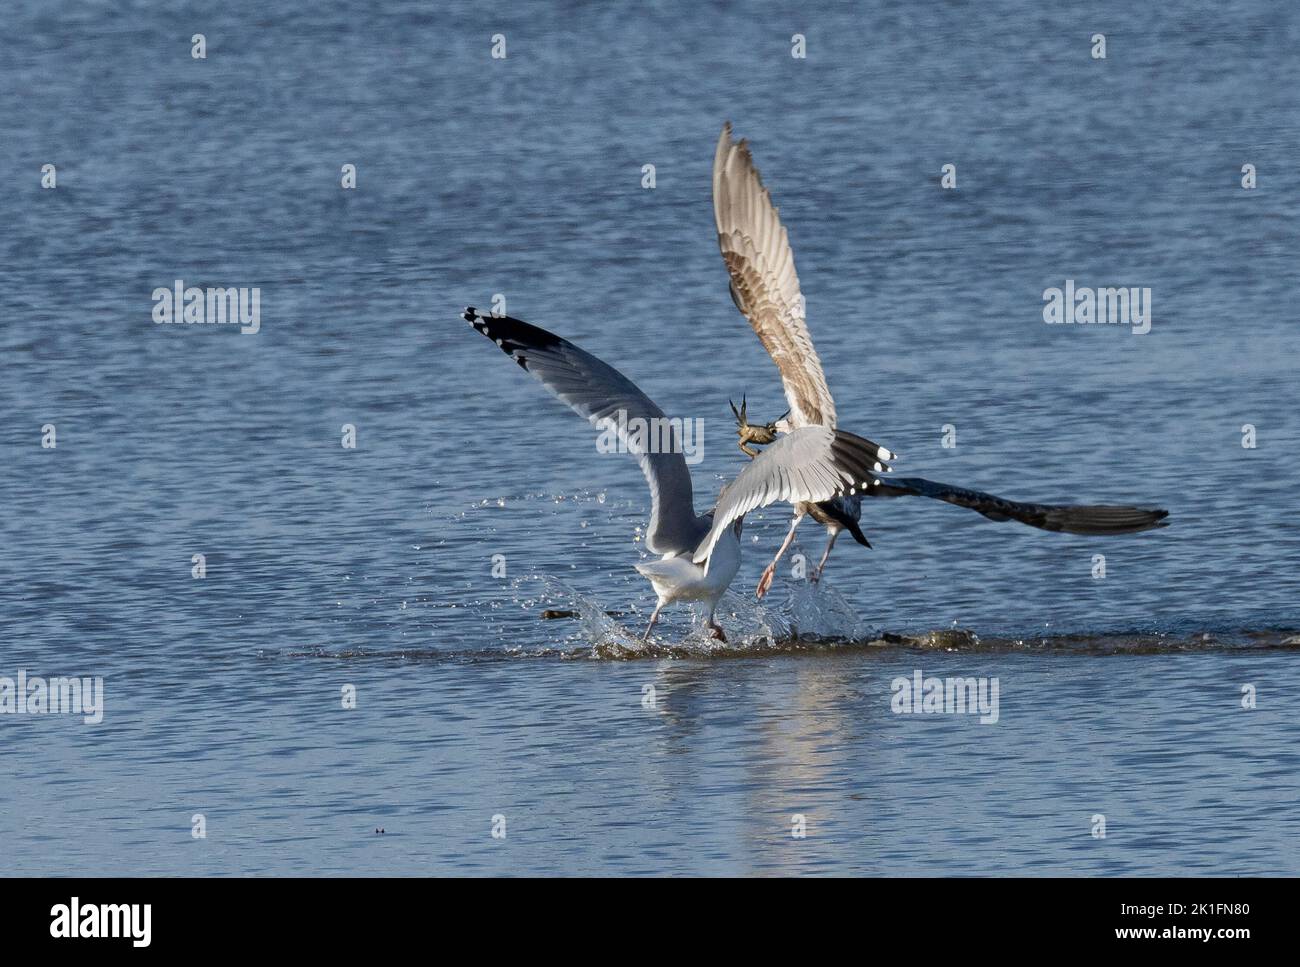 Adult Herring Gull (Larus argentatus) attempts to steal small crab from juvenile Herring Gull Stock Photo